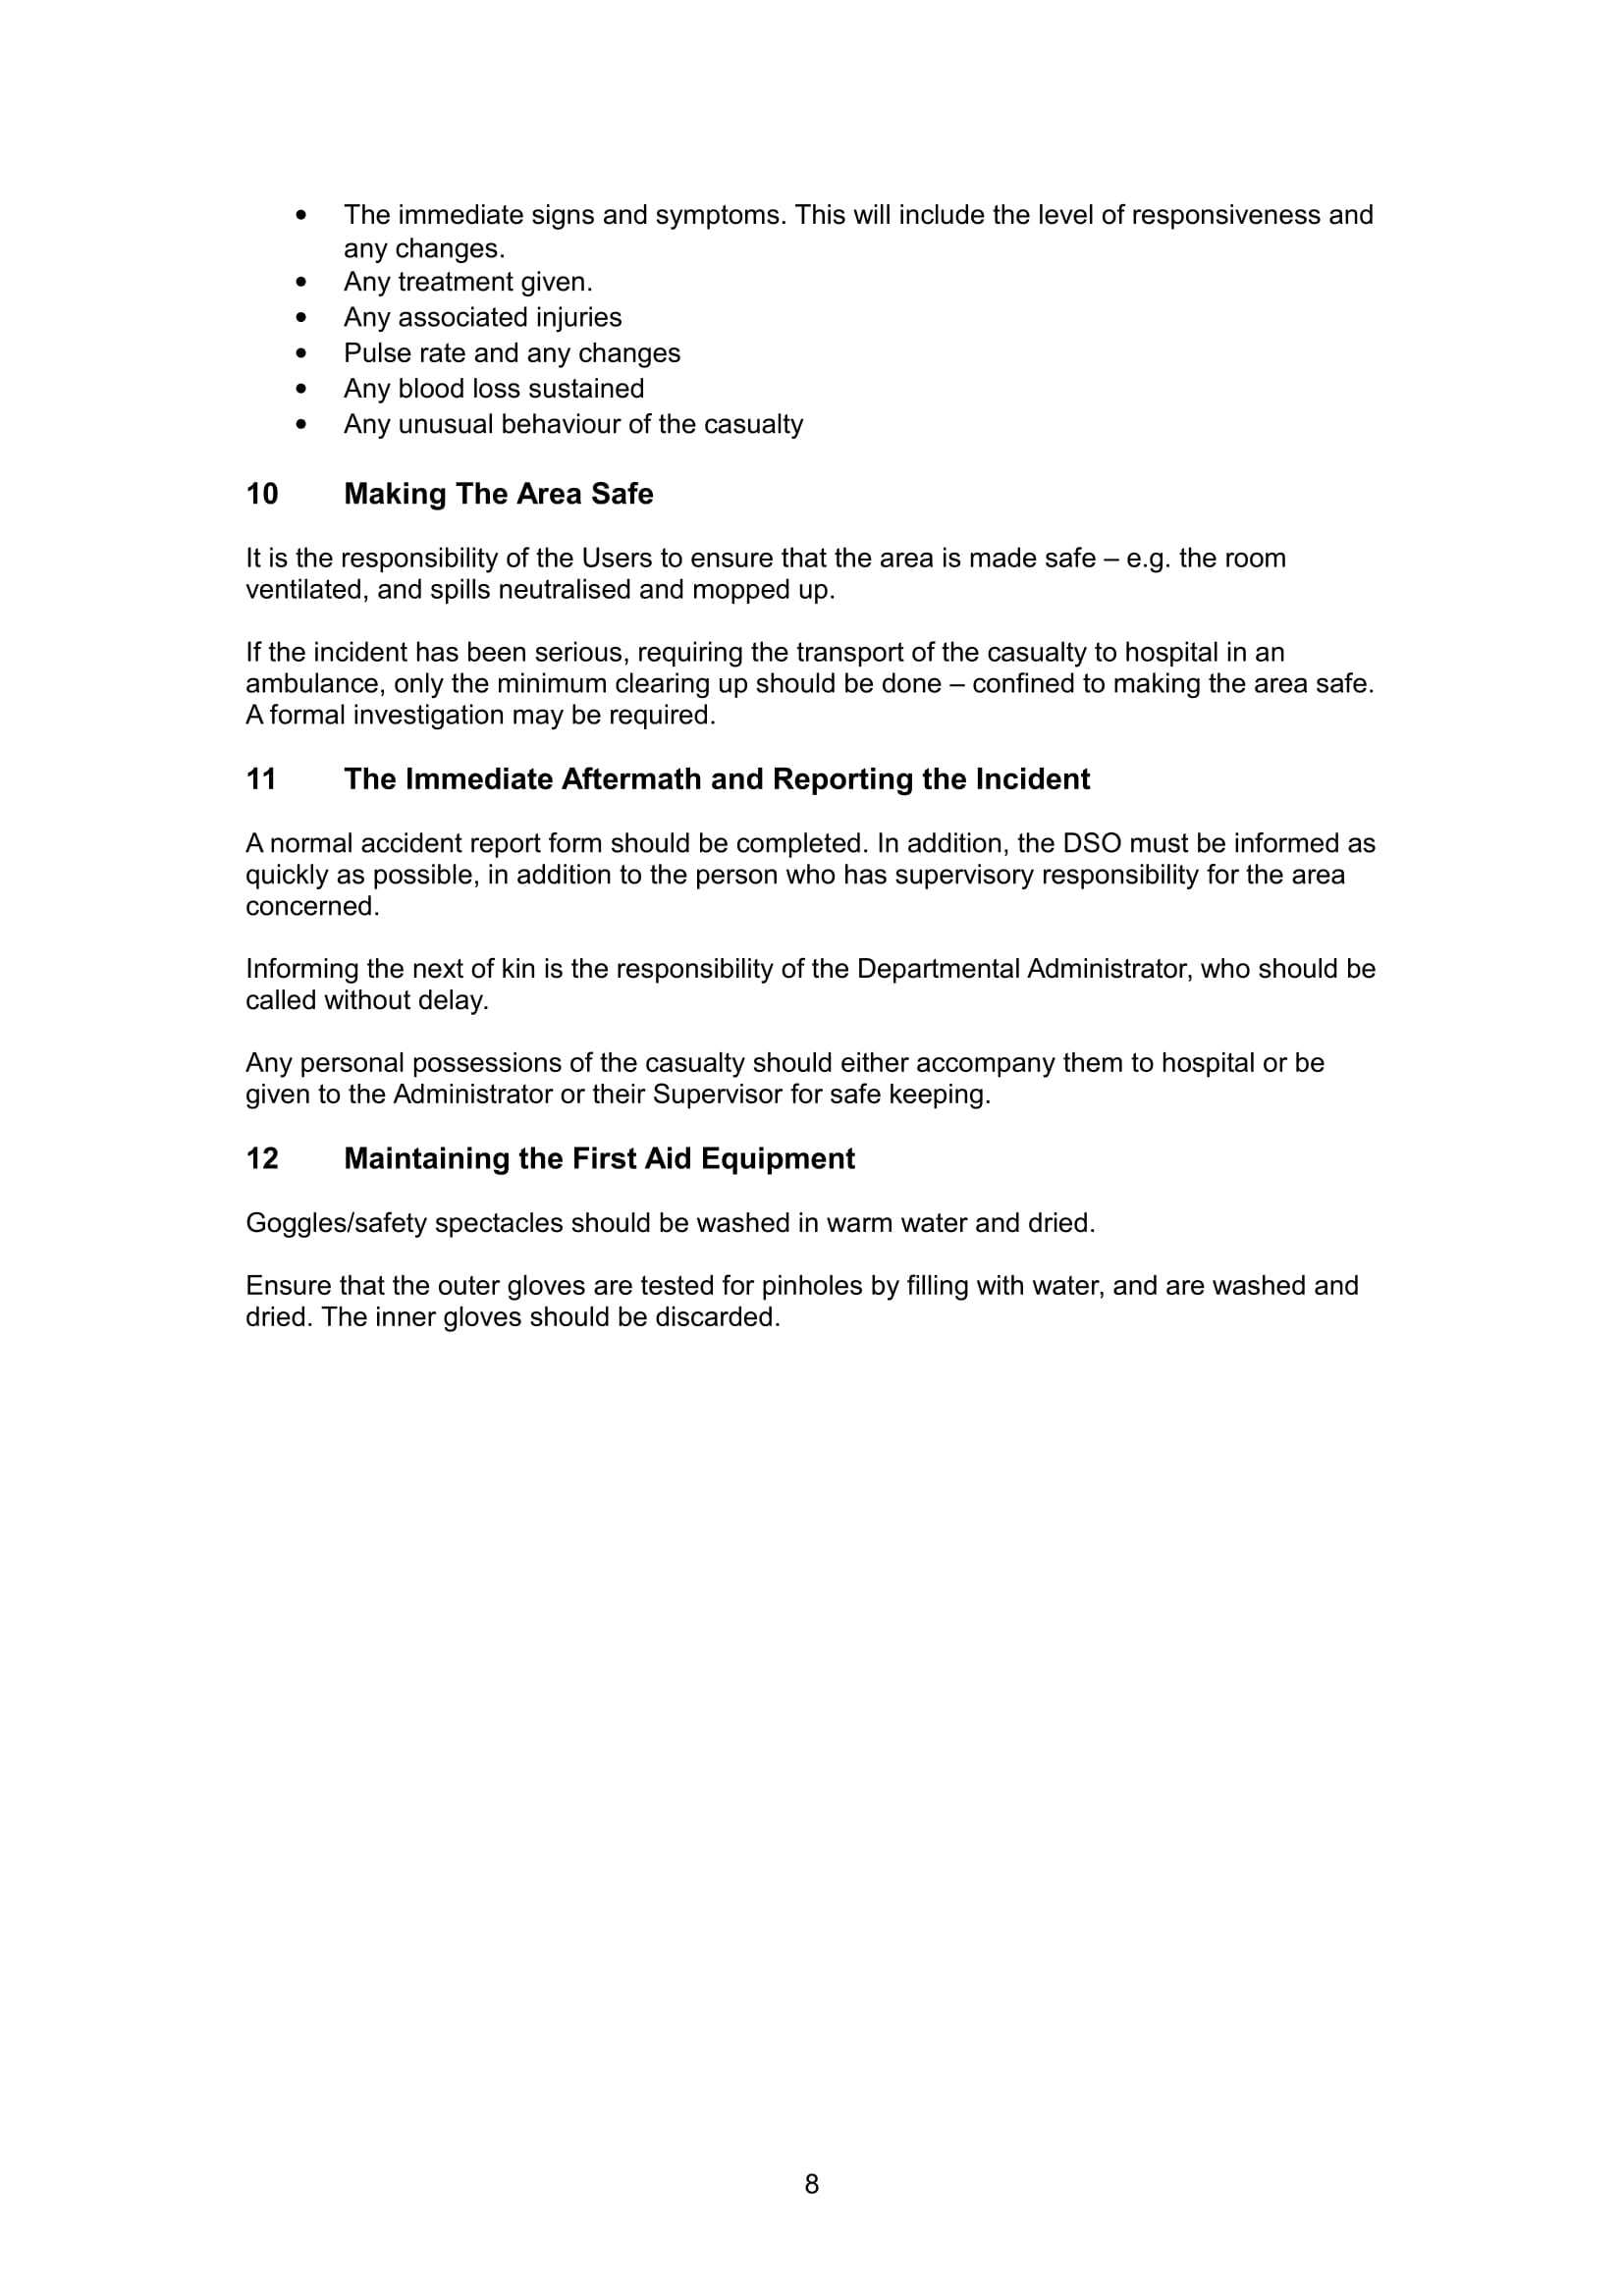 Incident Report Form Template Qld ] – Michael Smith News 17 Throughout Incident Report Form Template Qld